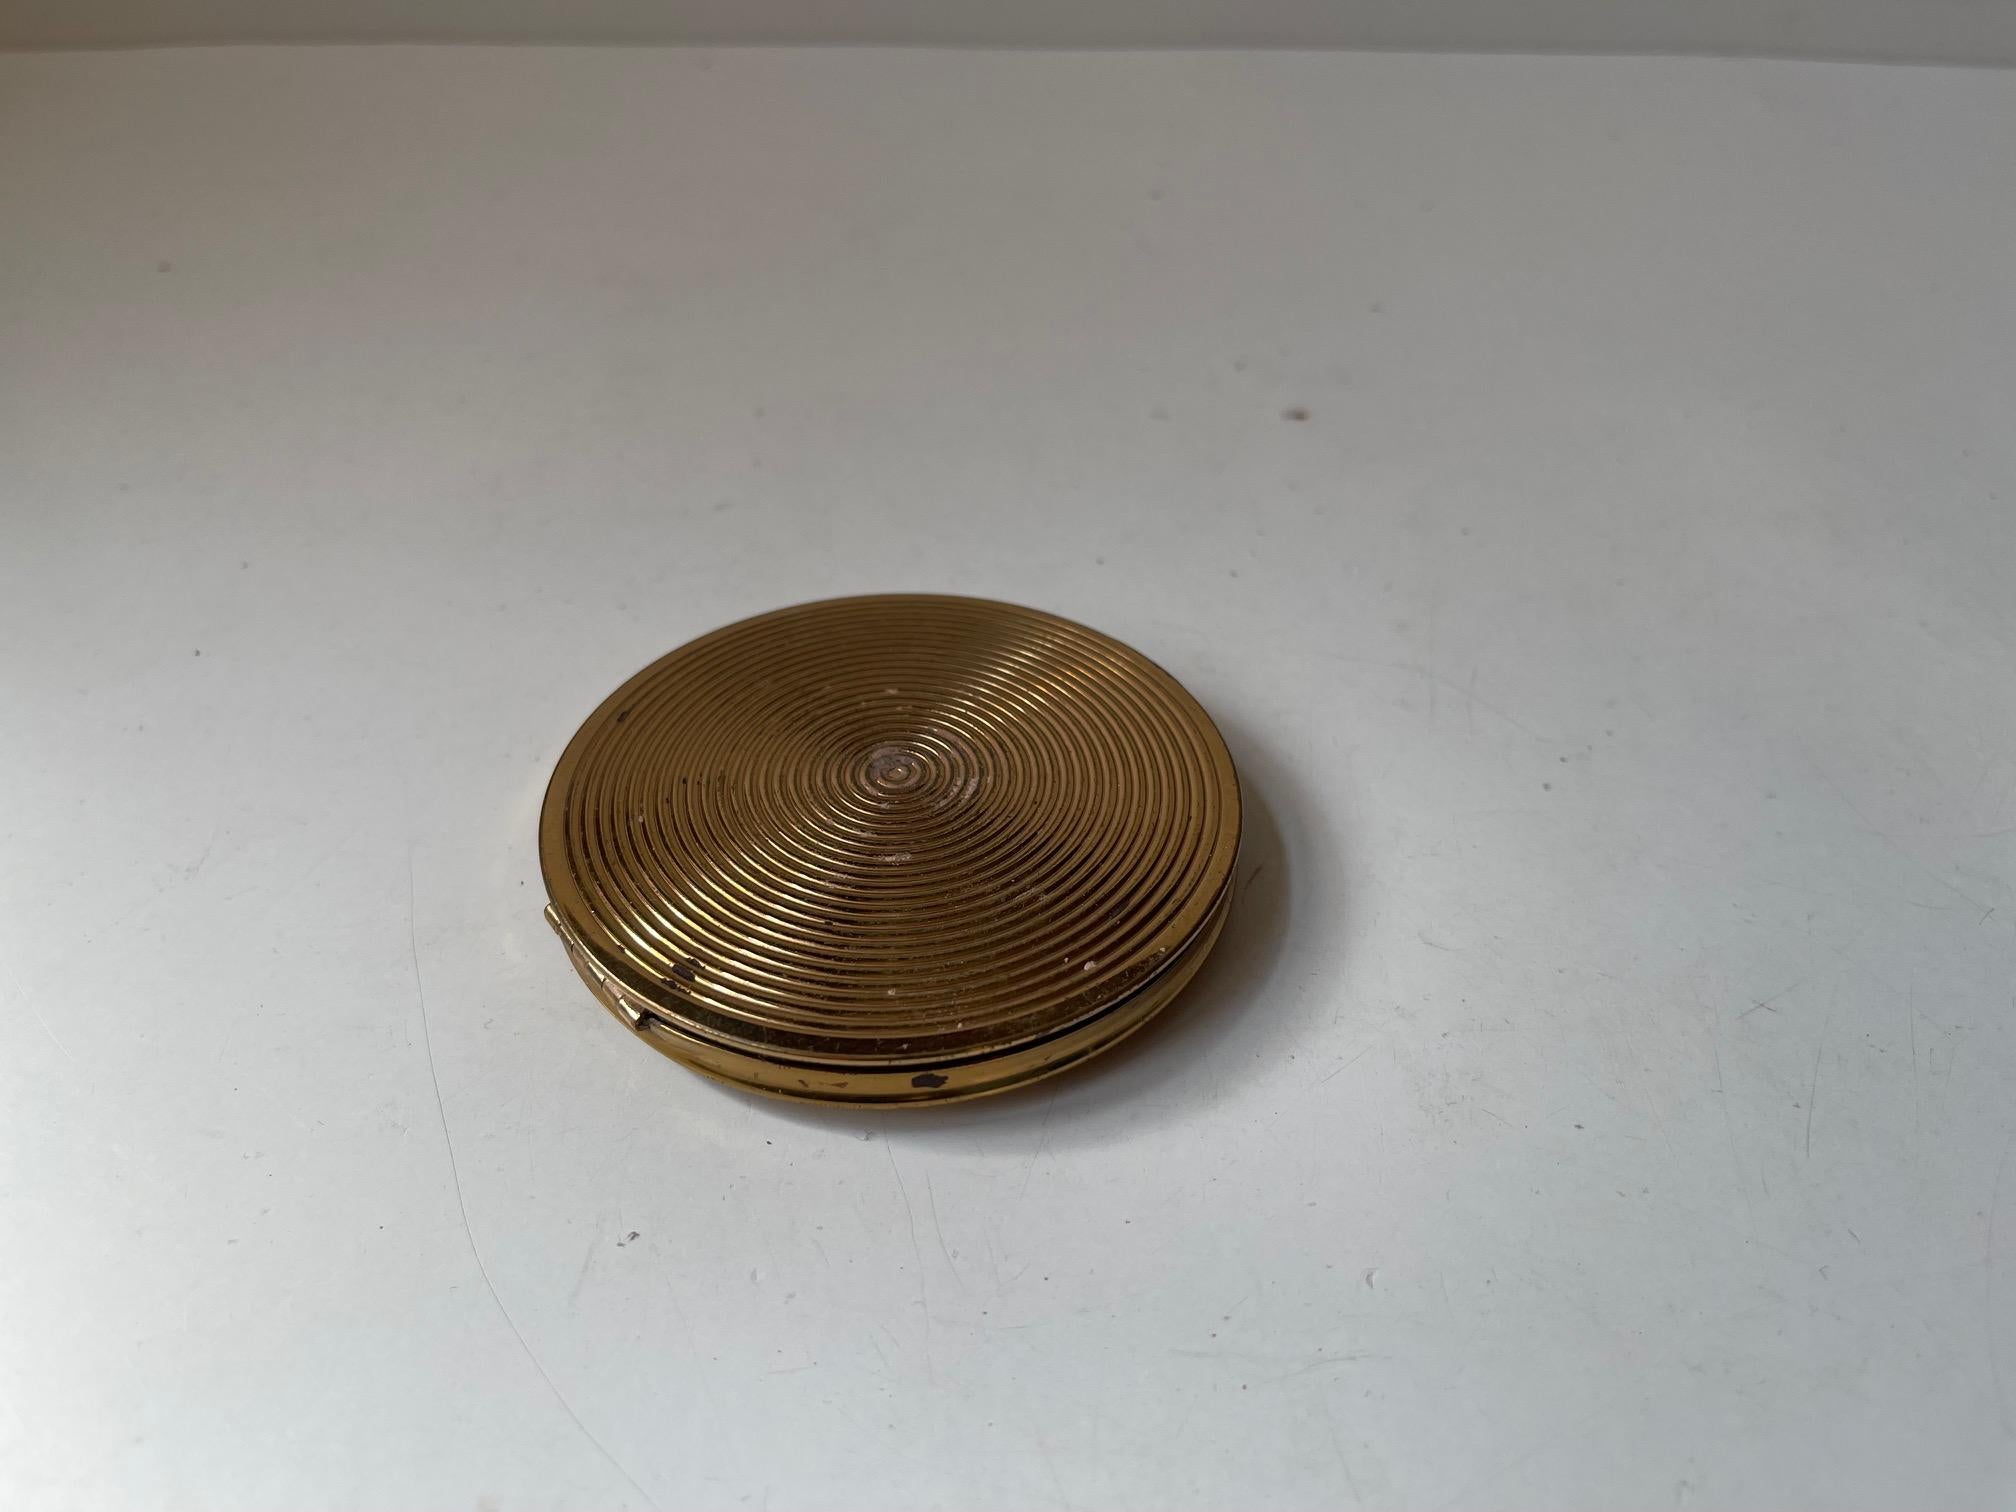 Vintage Swiss Powder Compact in Mother of Pearl & Gold Plating In Good Condition For Sale In Esbjerg, DK